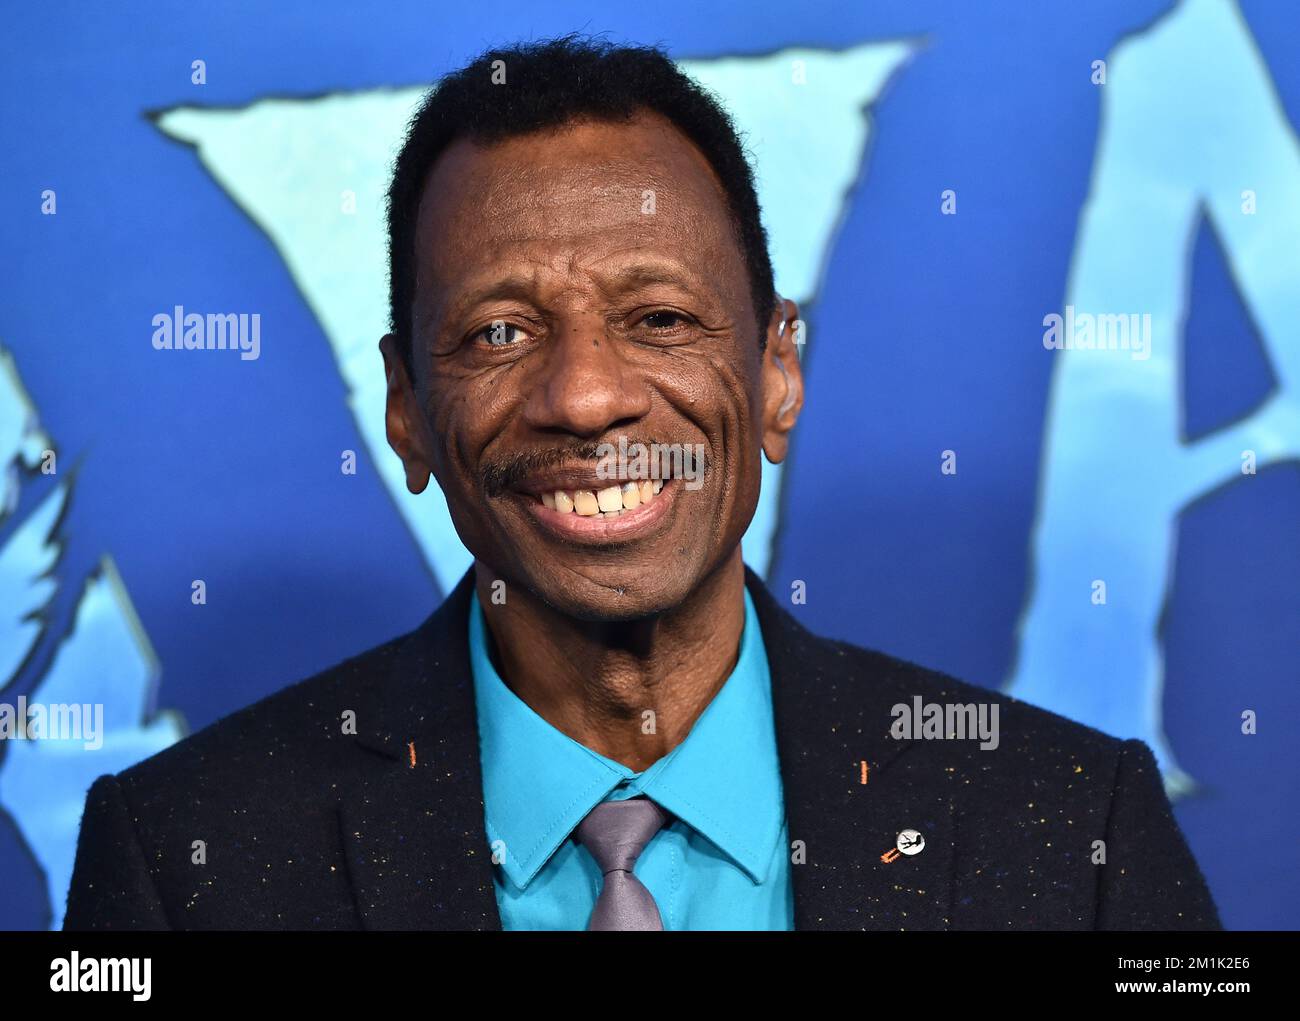 Hollywood, CA on December 12, 2022. CJ Jones arriving to the U.S. premiere of 20th Century Studios’ “Avatar: The Way of Water”   held at the Dolby Theatre in Hollywood, CA on December 12, 2022. © Lisa OConnor / AFF-USA.com Stock Photo